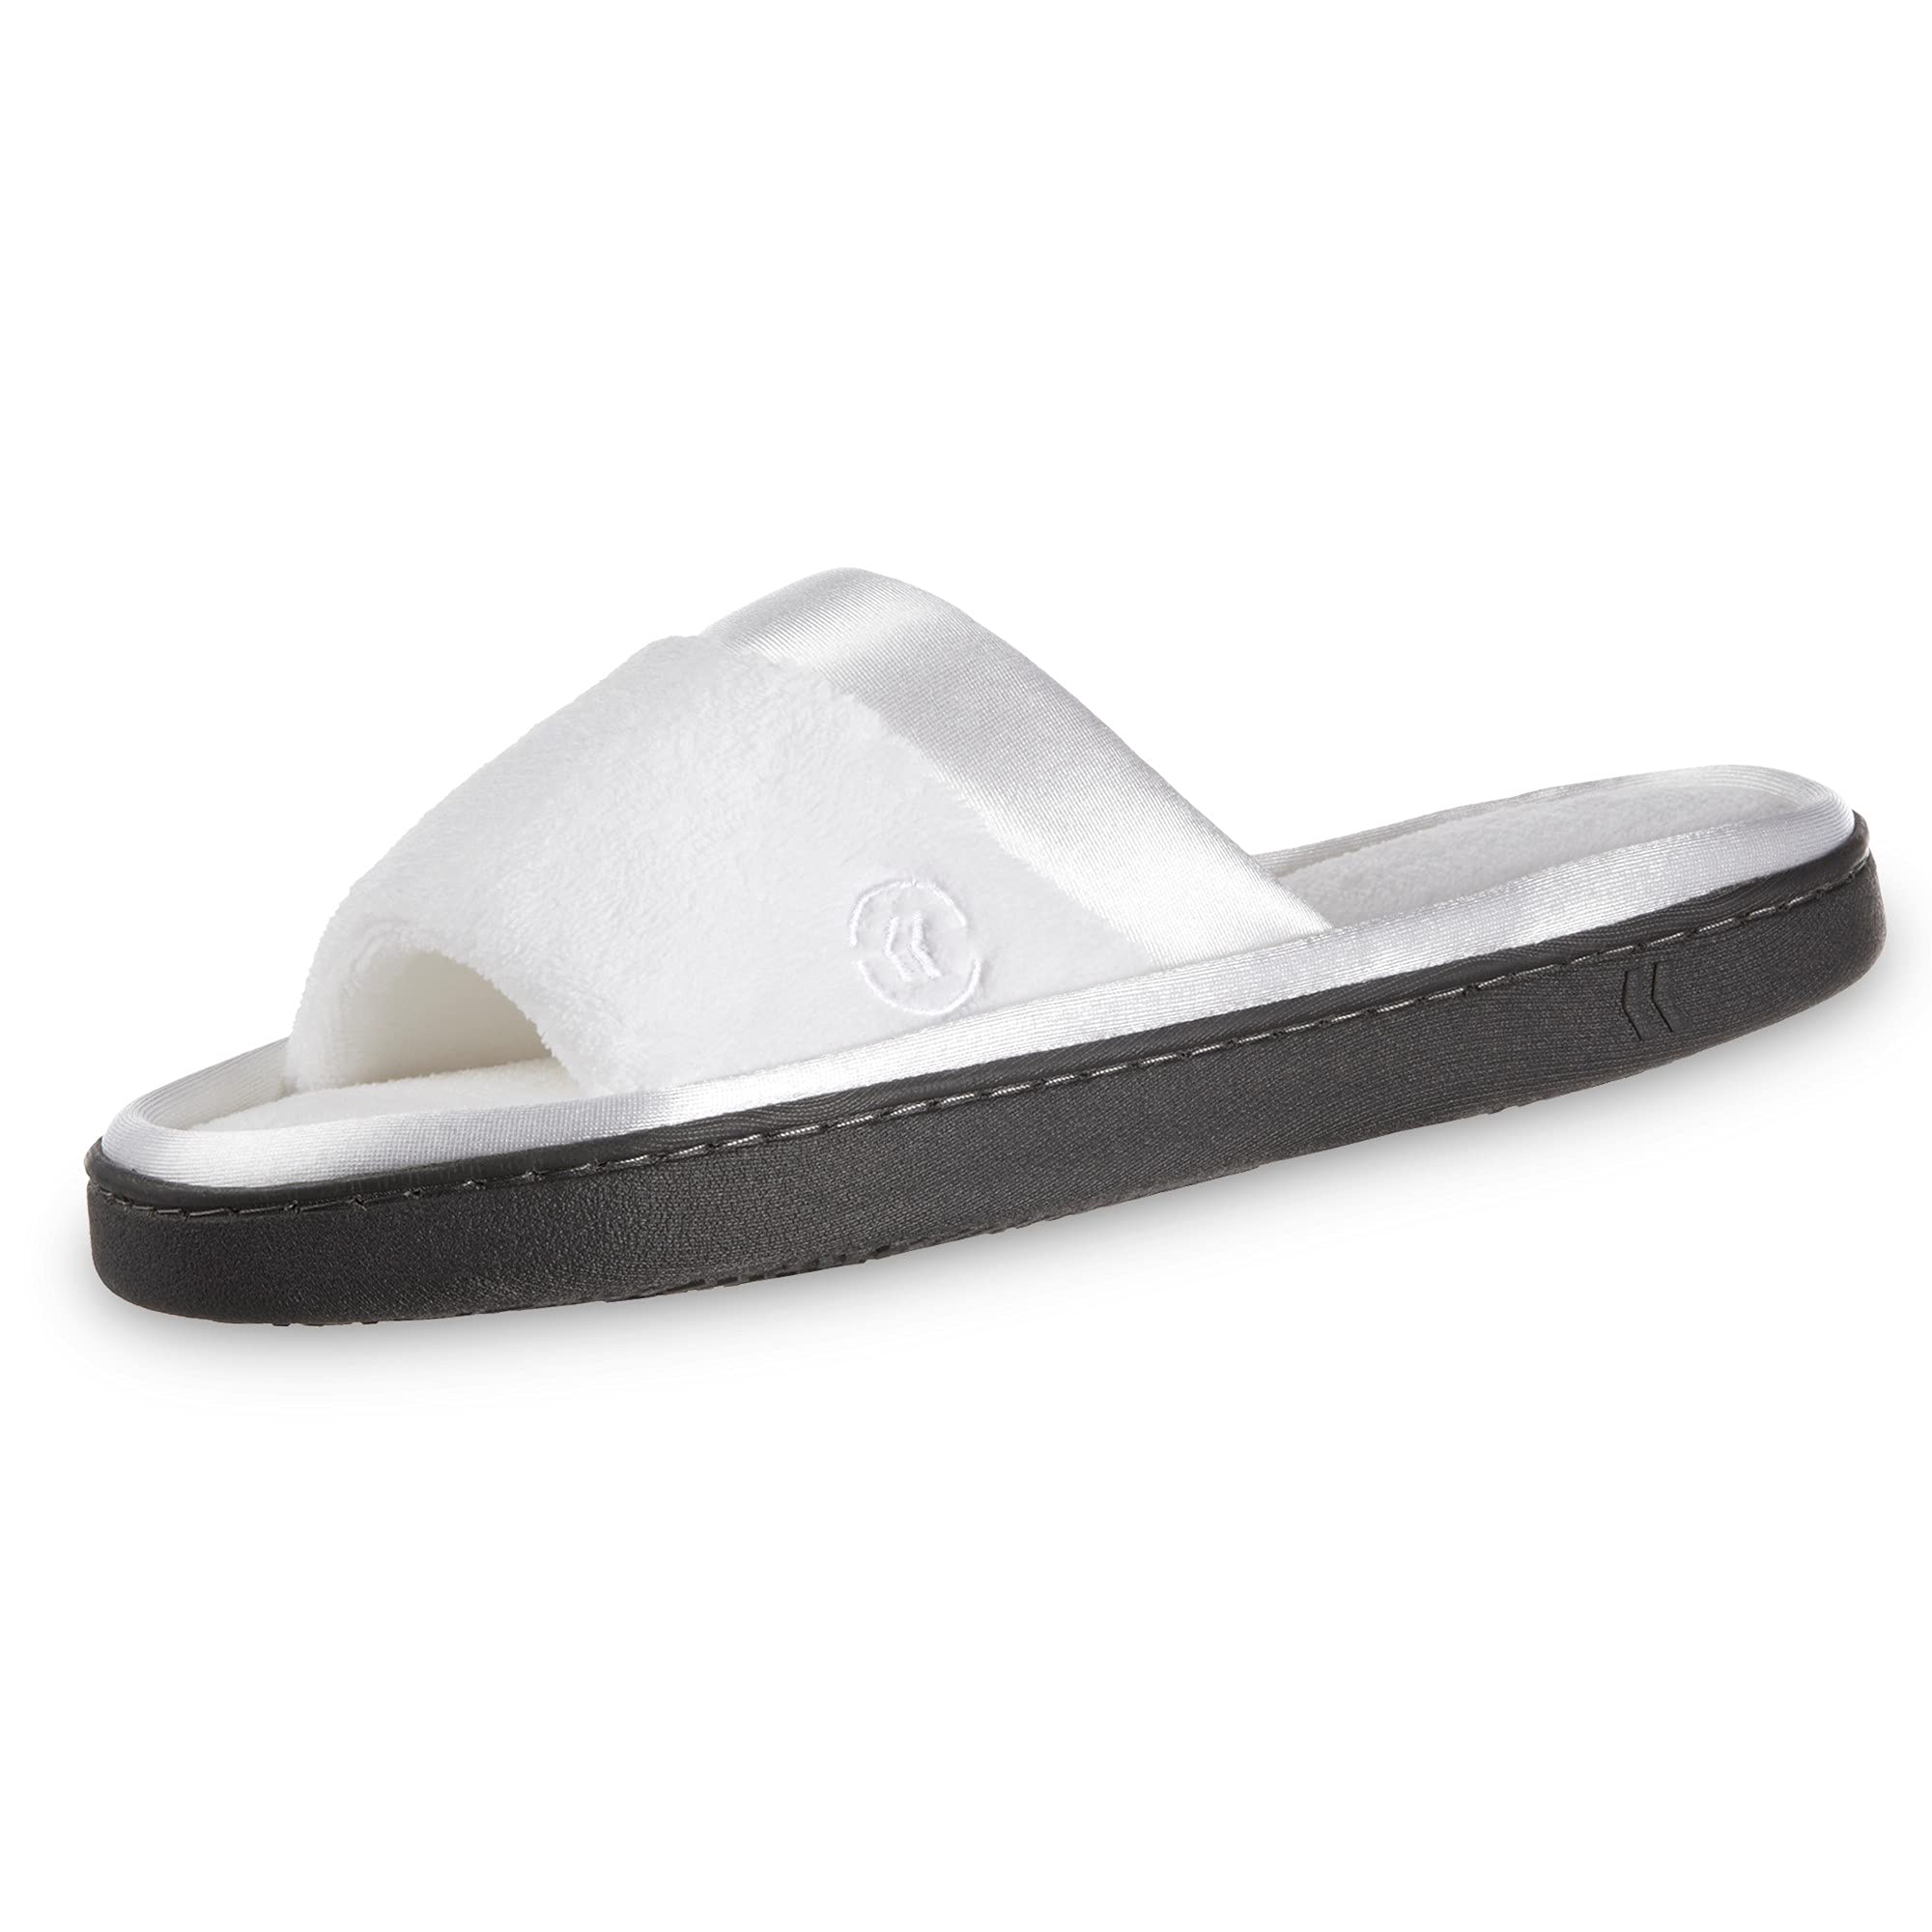 isotoner Women's Soft Microterry Wider Width Slide Slippers, with Satin Trim and Comfort Footbed